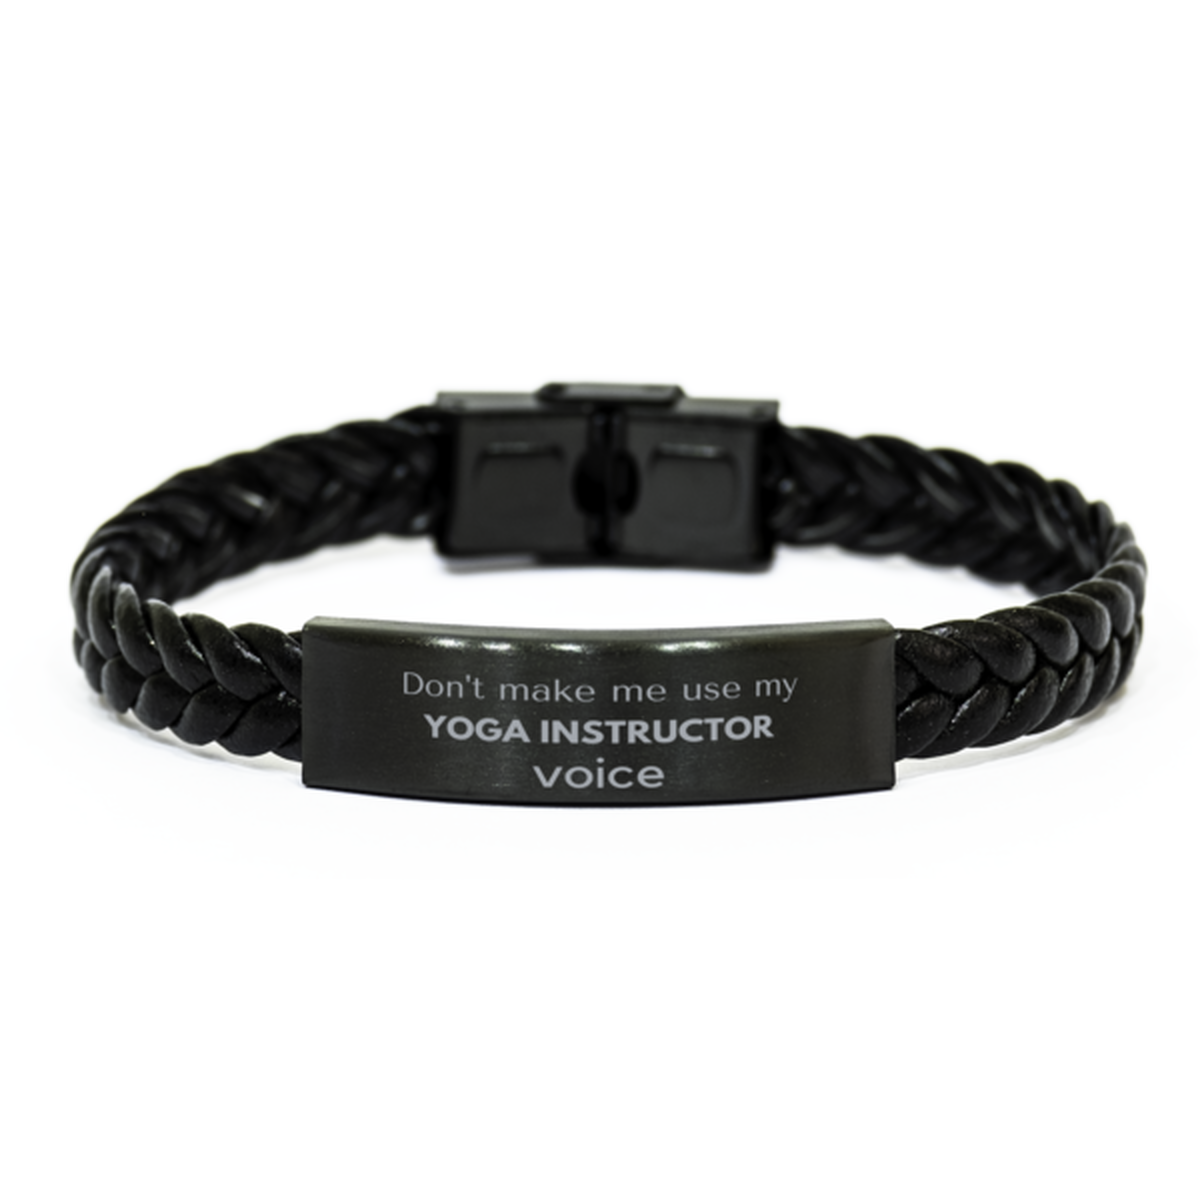 Don't make me use my Yoga Instructor voice, Sarcasm Yoga Instructor Gifts, Christmas Yoga Instructor Braided Leather Bracelet Birthday Unique Gifts For Yoga Instructor Coworkers, Men, Women, Colleague, Friends